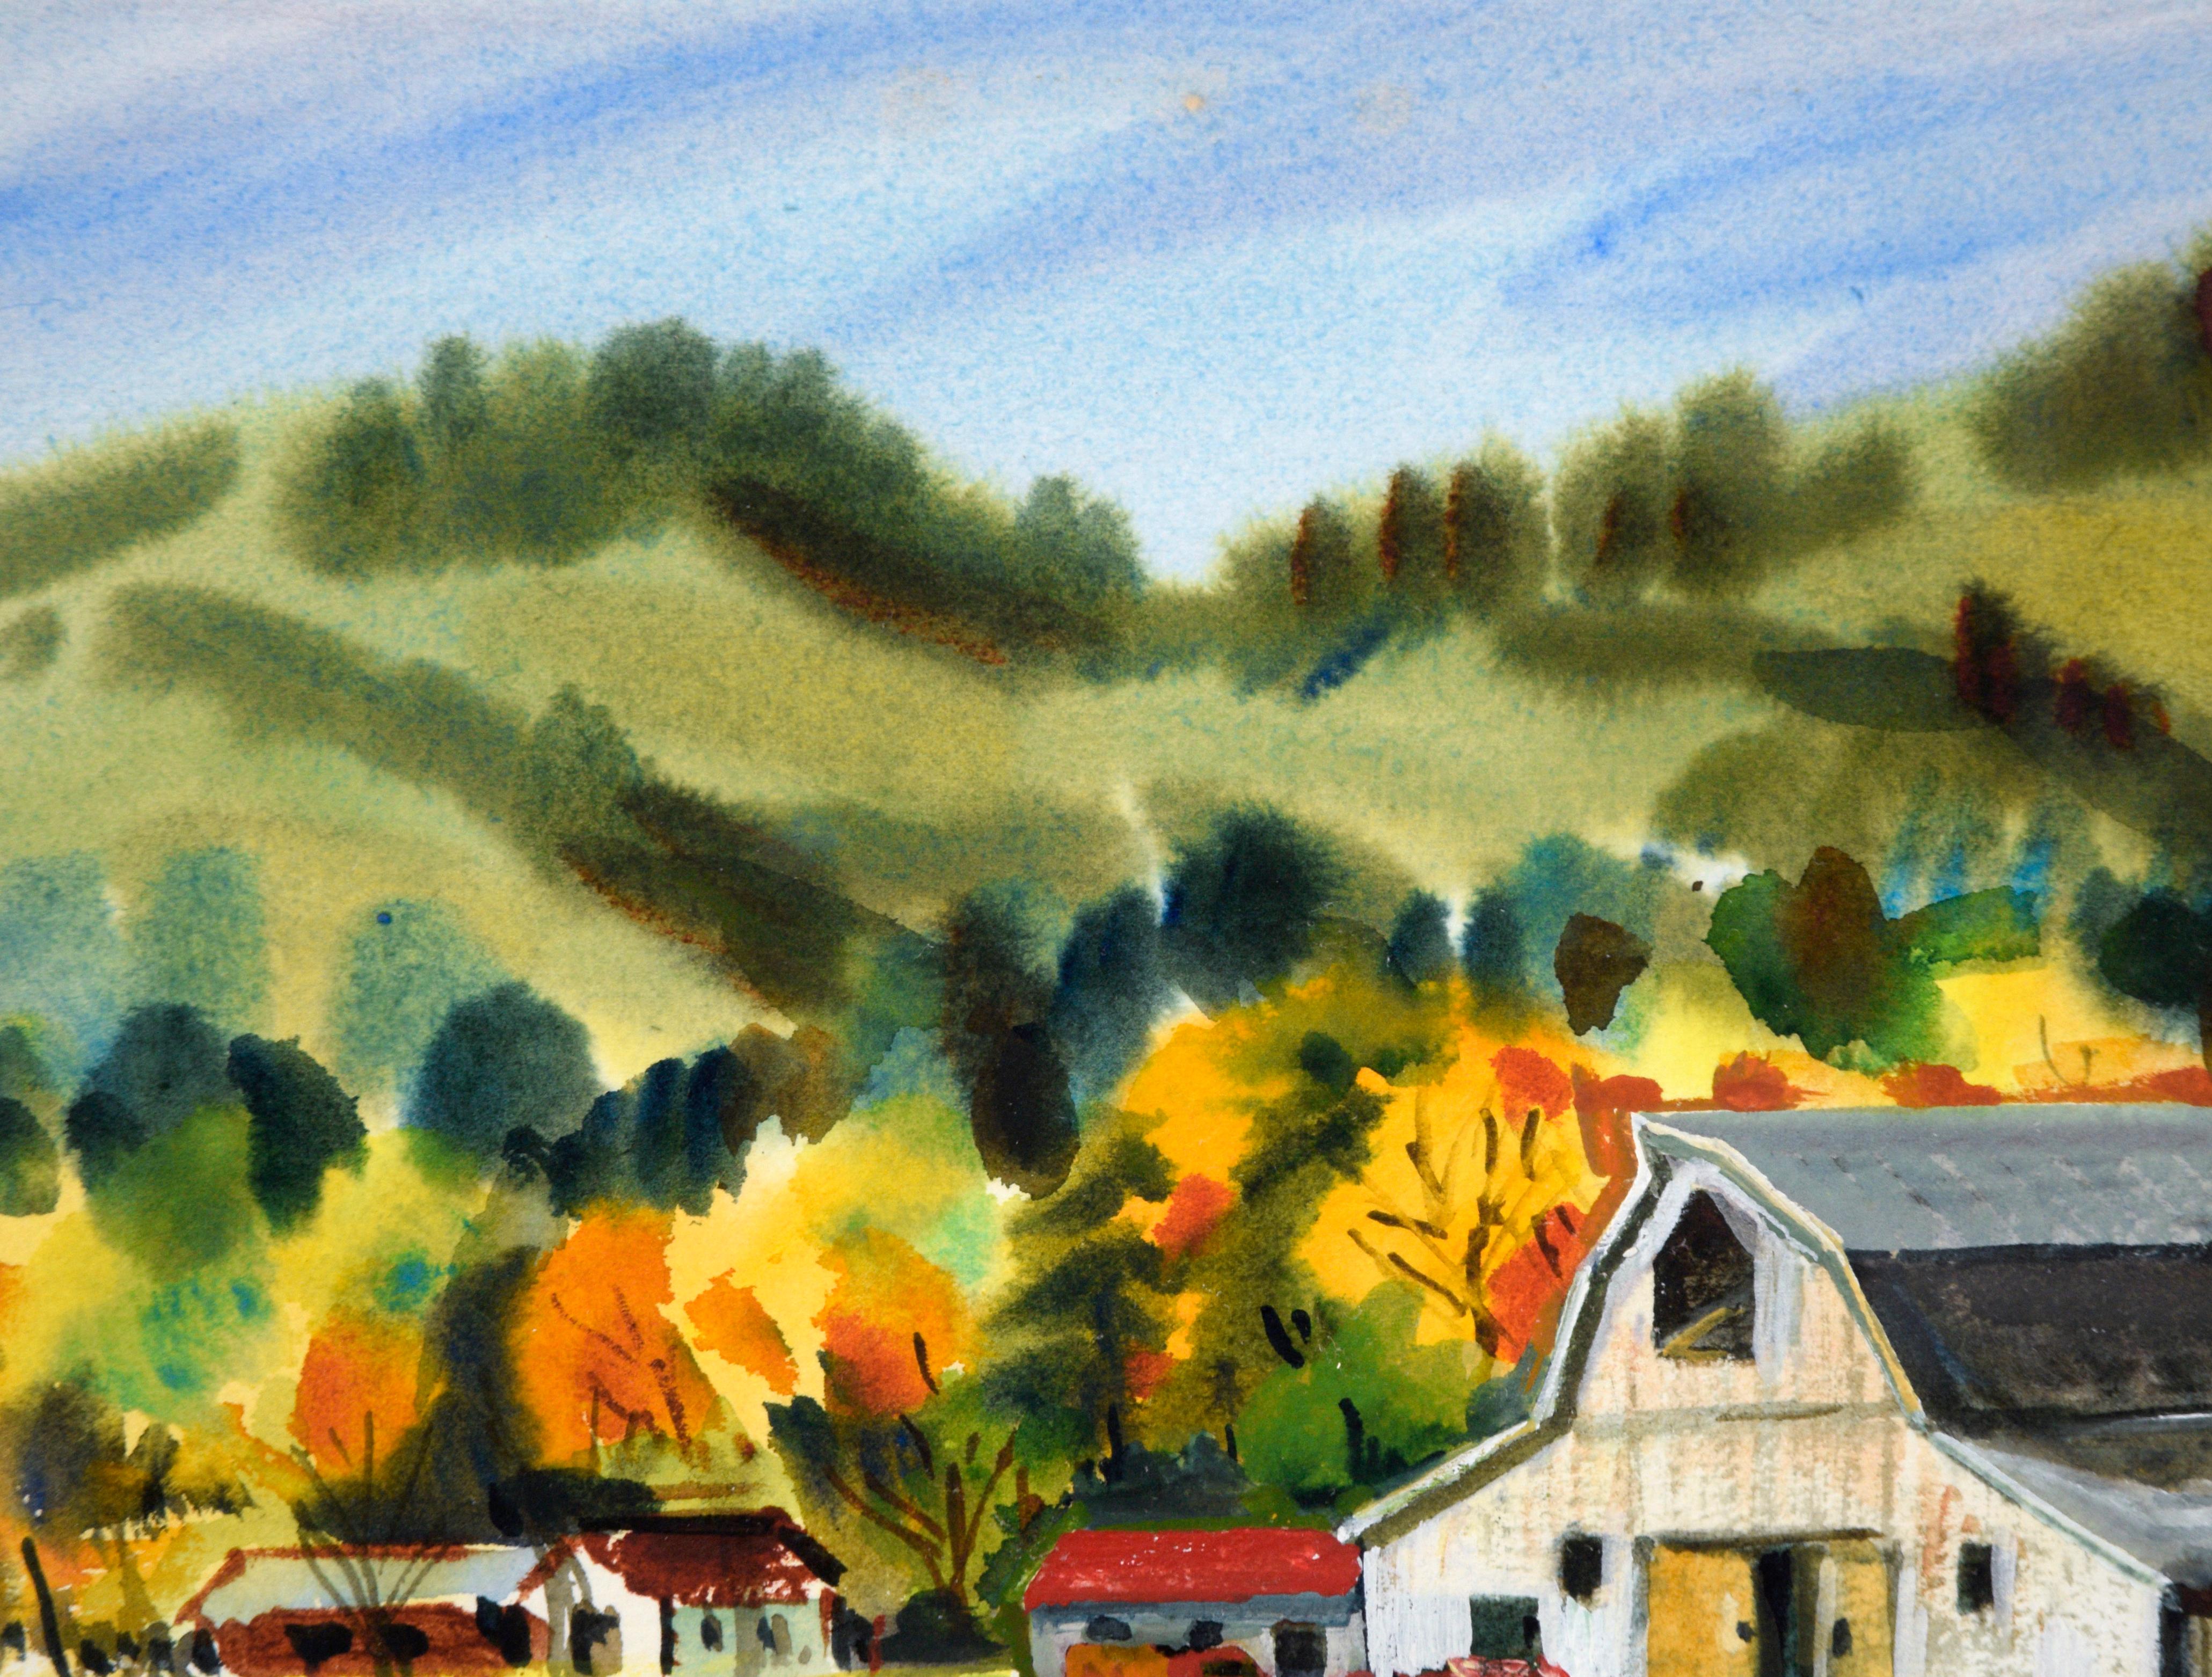 Autumnal Country Barn in Watercolor Landscape on Paper - Art by Lewis Suzuki